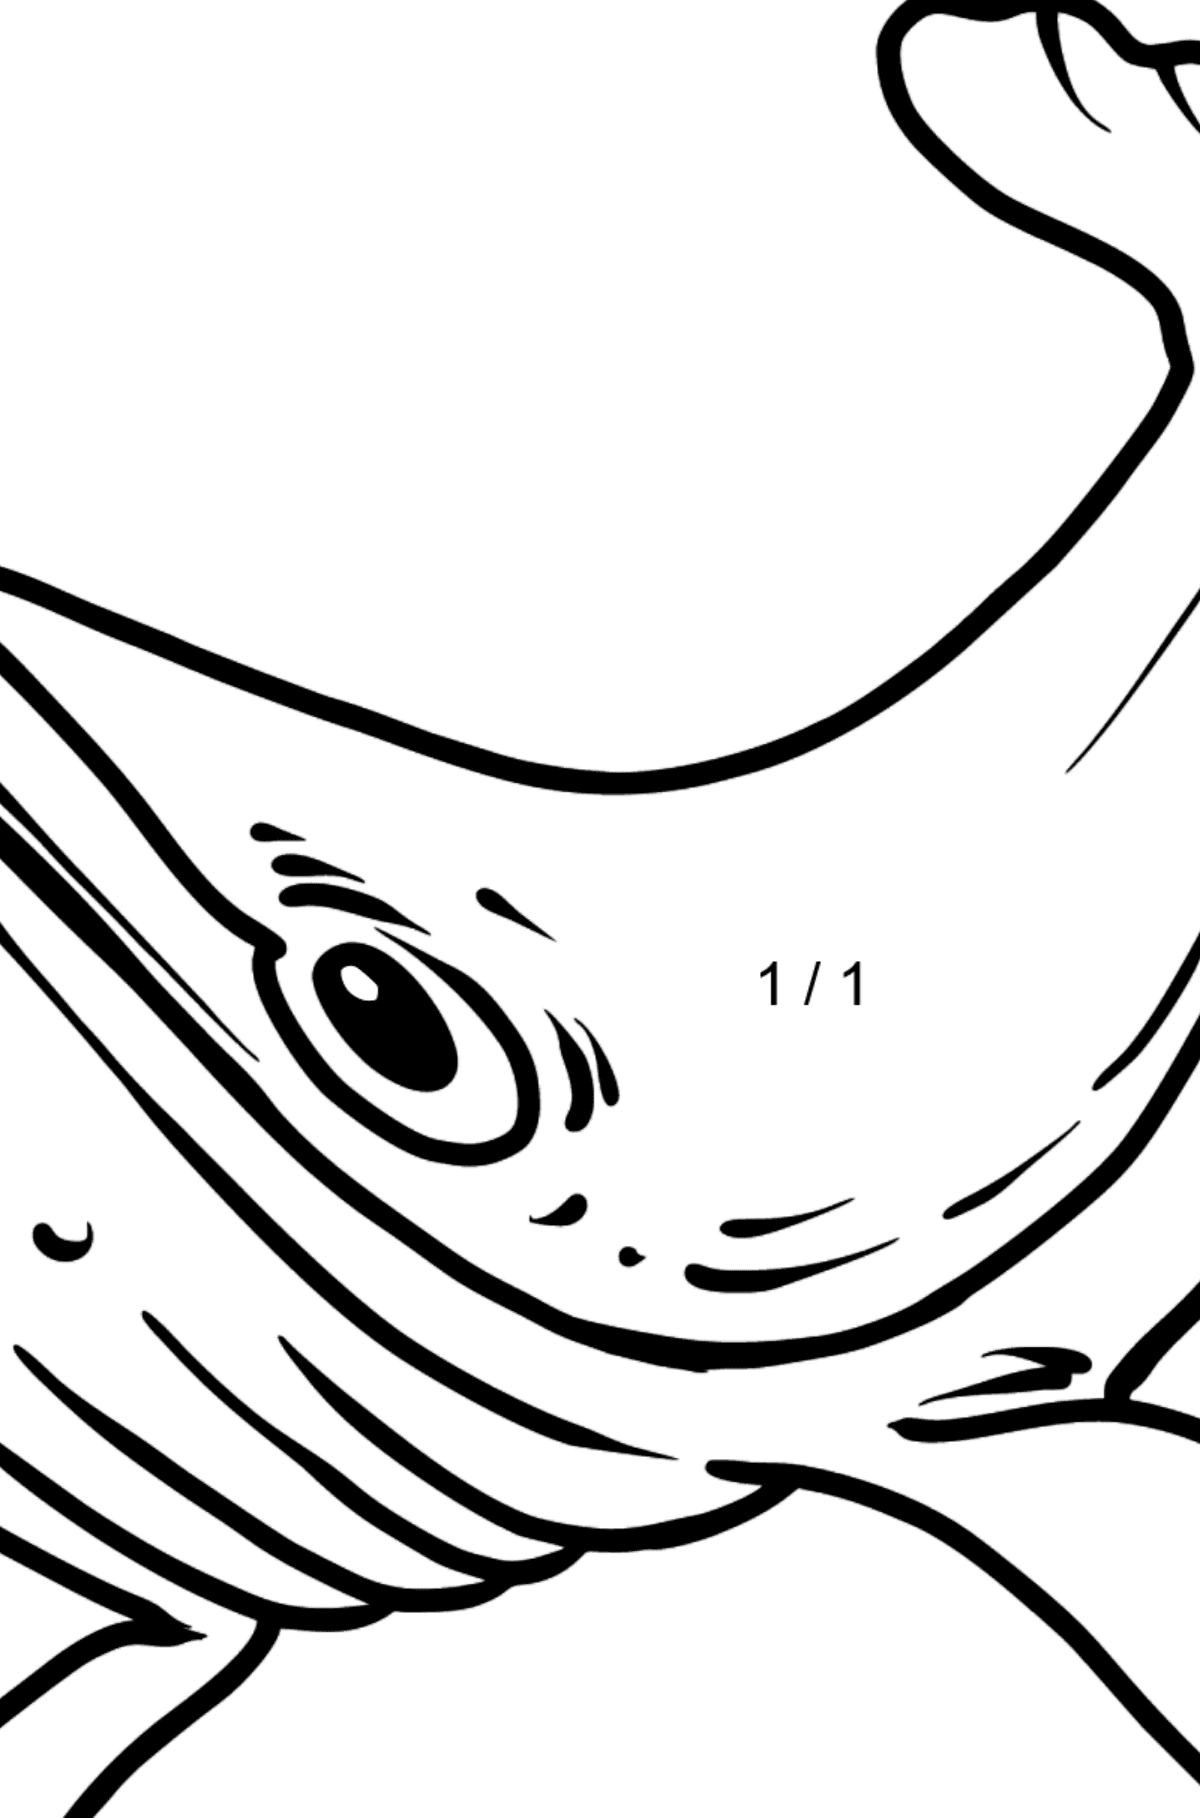 Whale coloring page - Math Coloring - Division for Kids